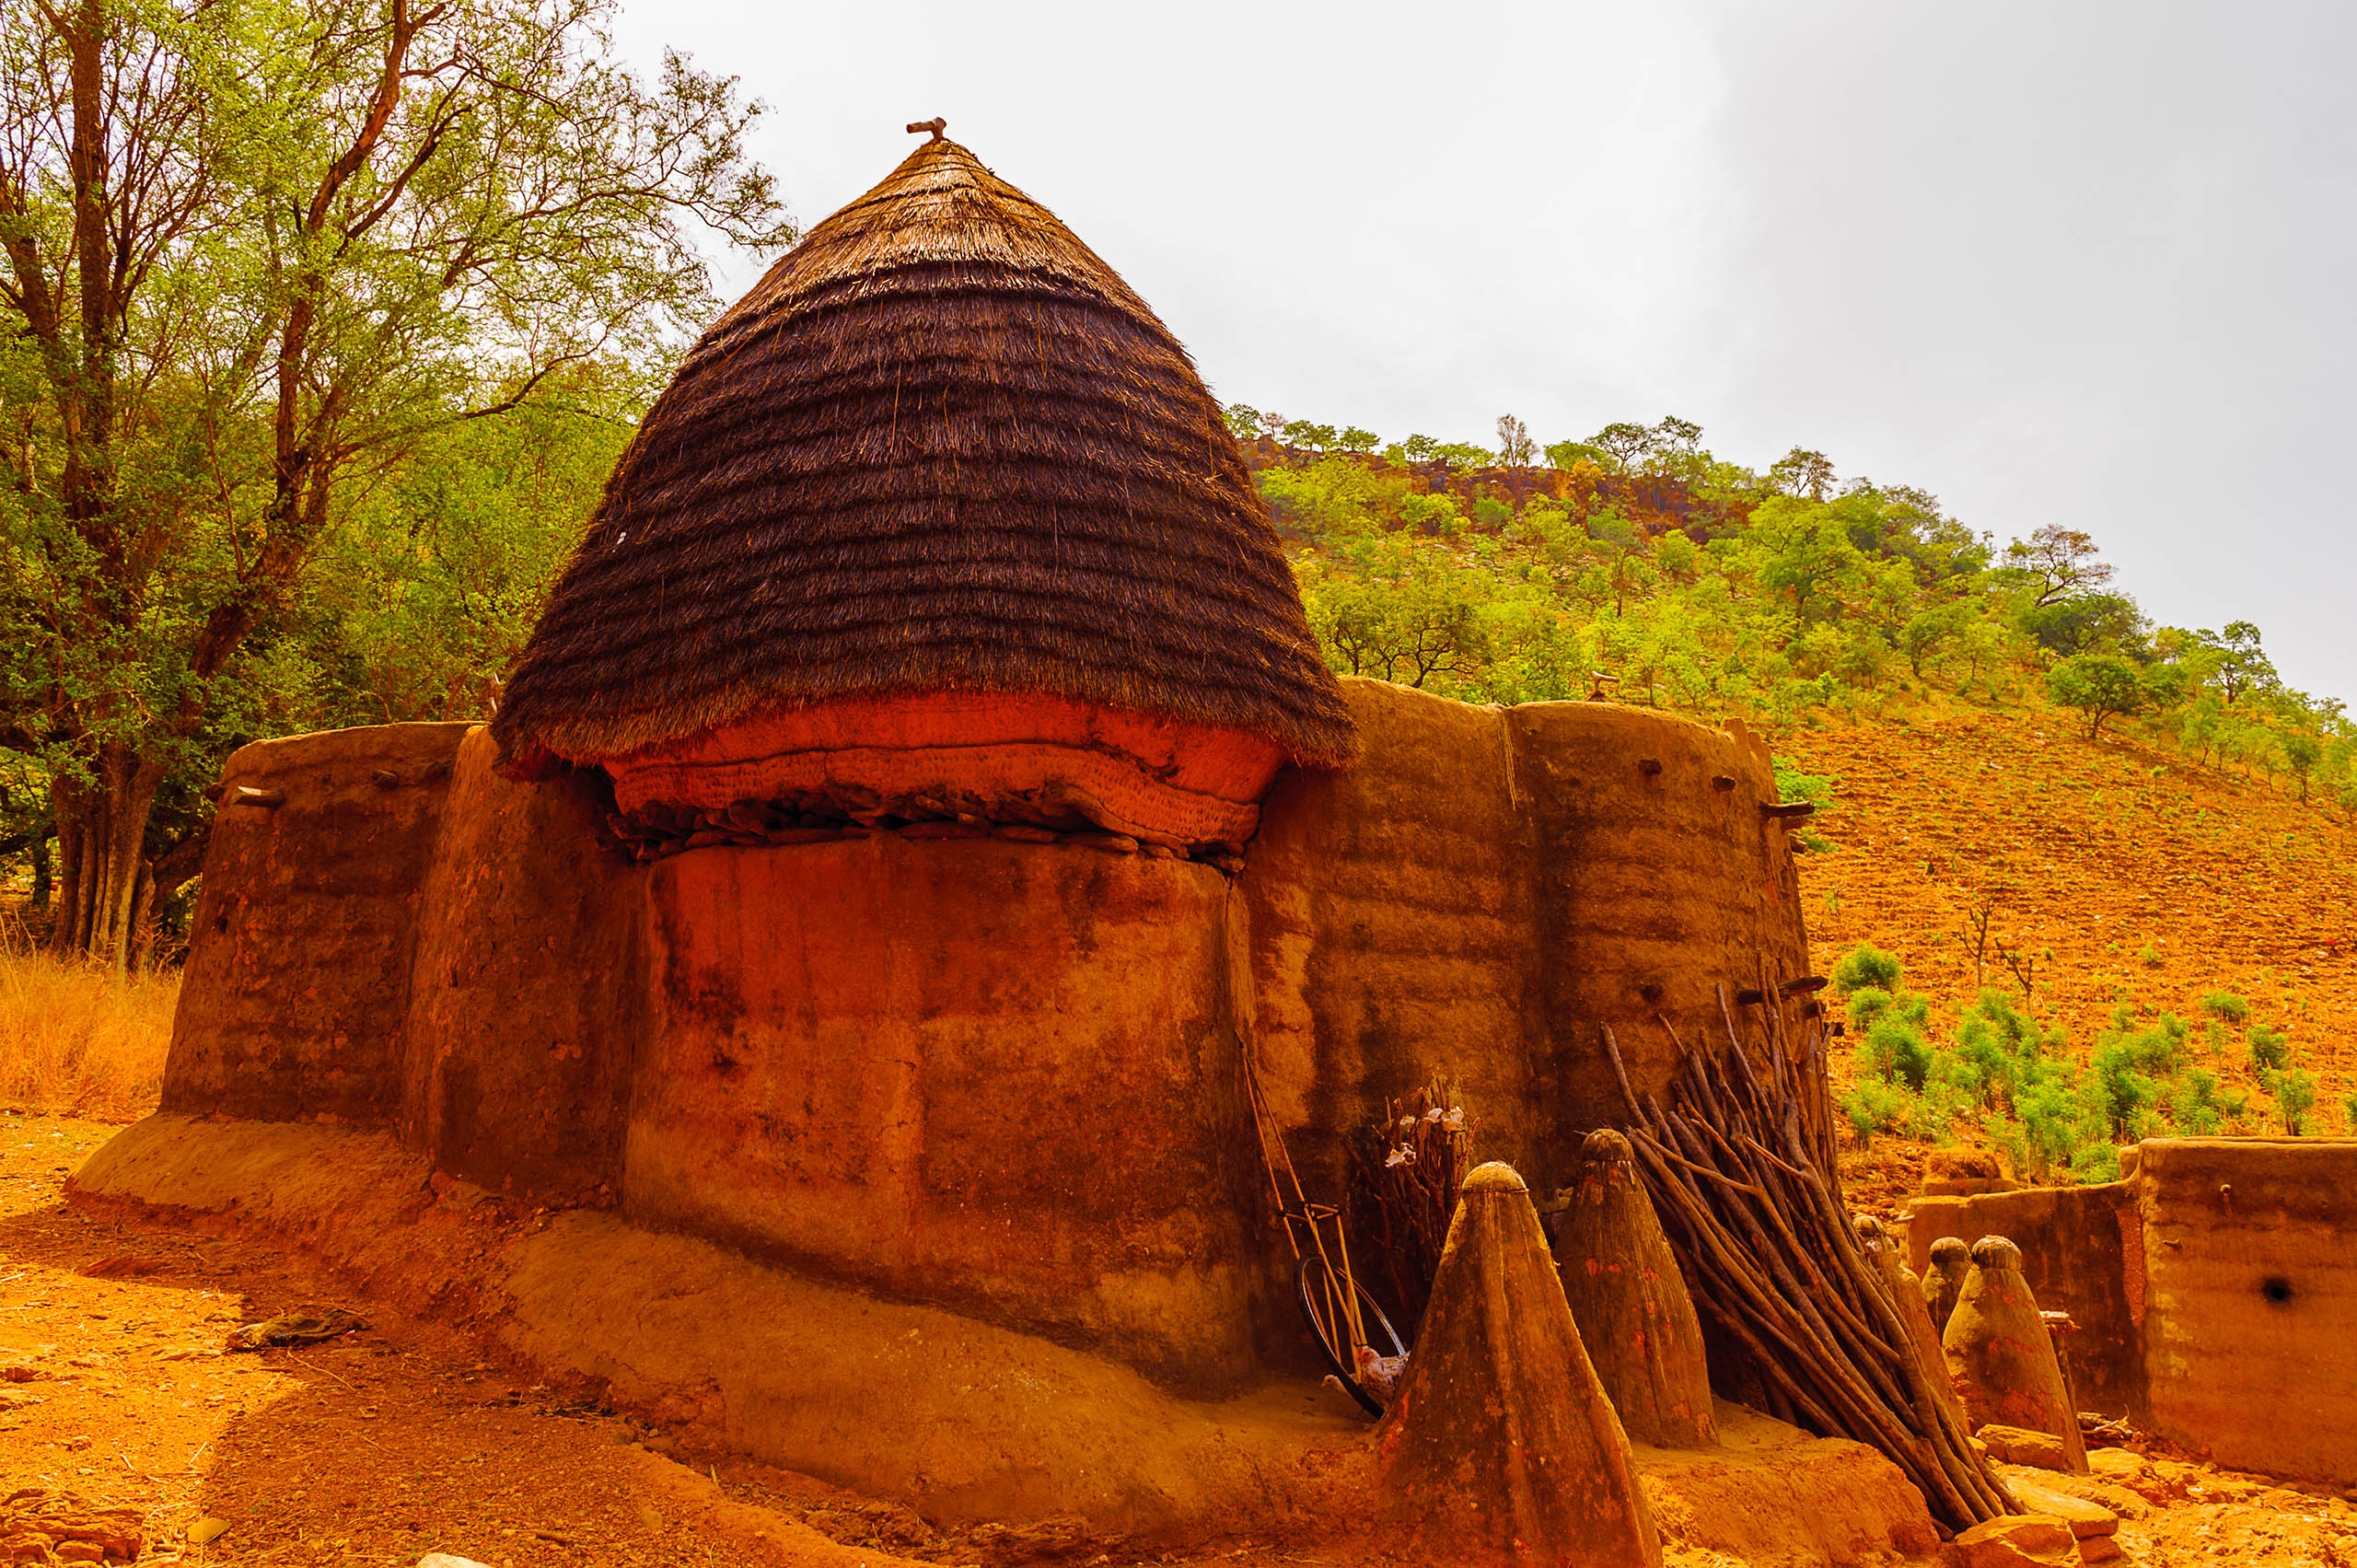 Local traditional hut in avillage in Togo